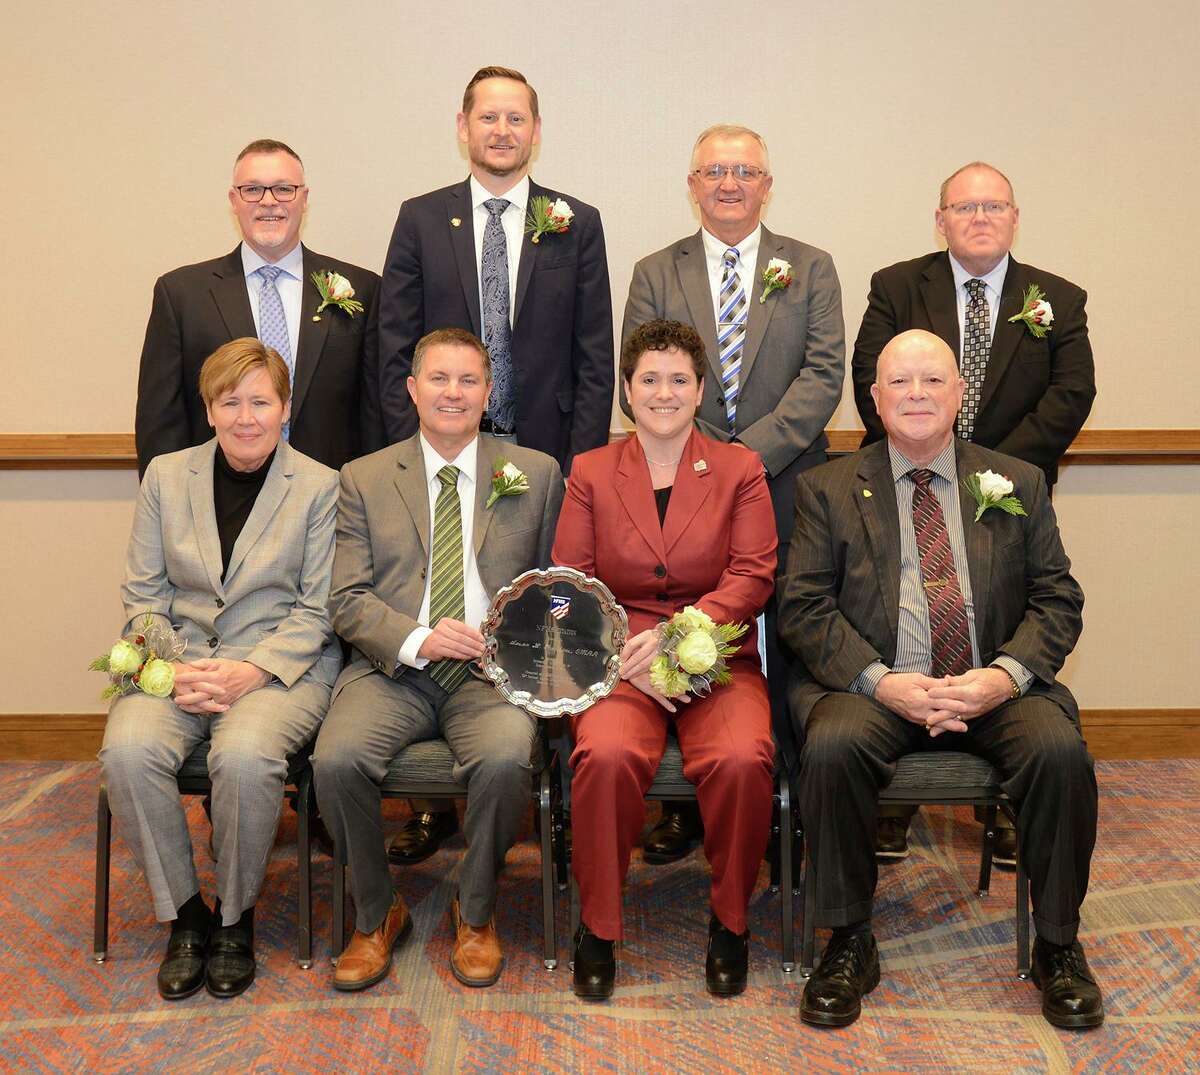 Spring Branch ISD athletic director Paige Hershey (front row, far left) was recognized for “contributions to interscholastic athletics at the local, state and national levels” at the 52nd National Athletic Directors Conference./